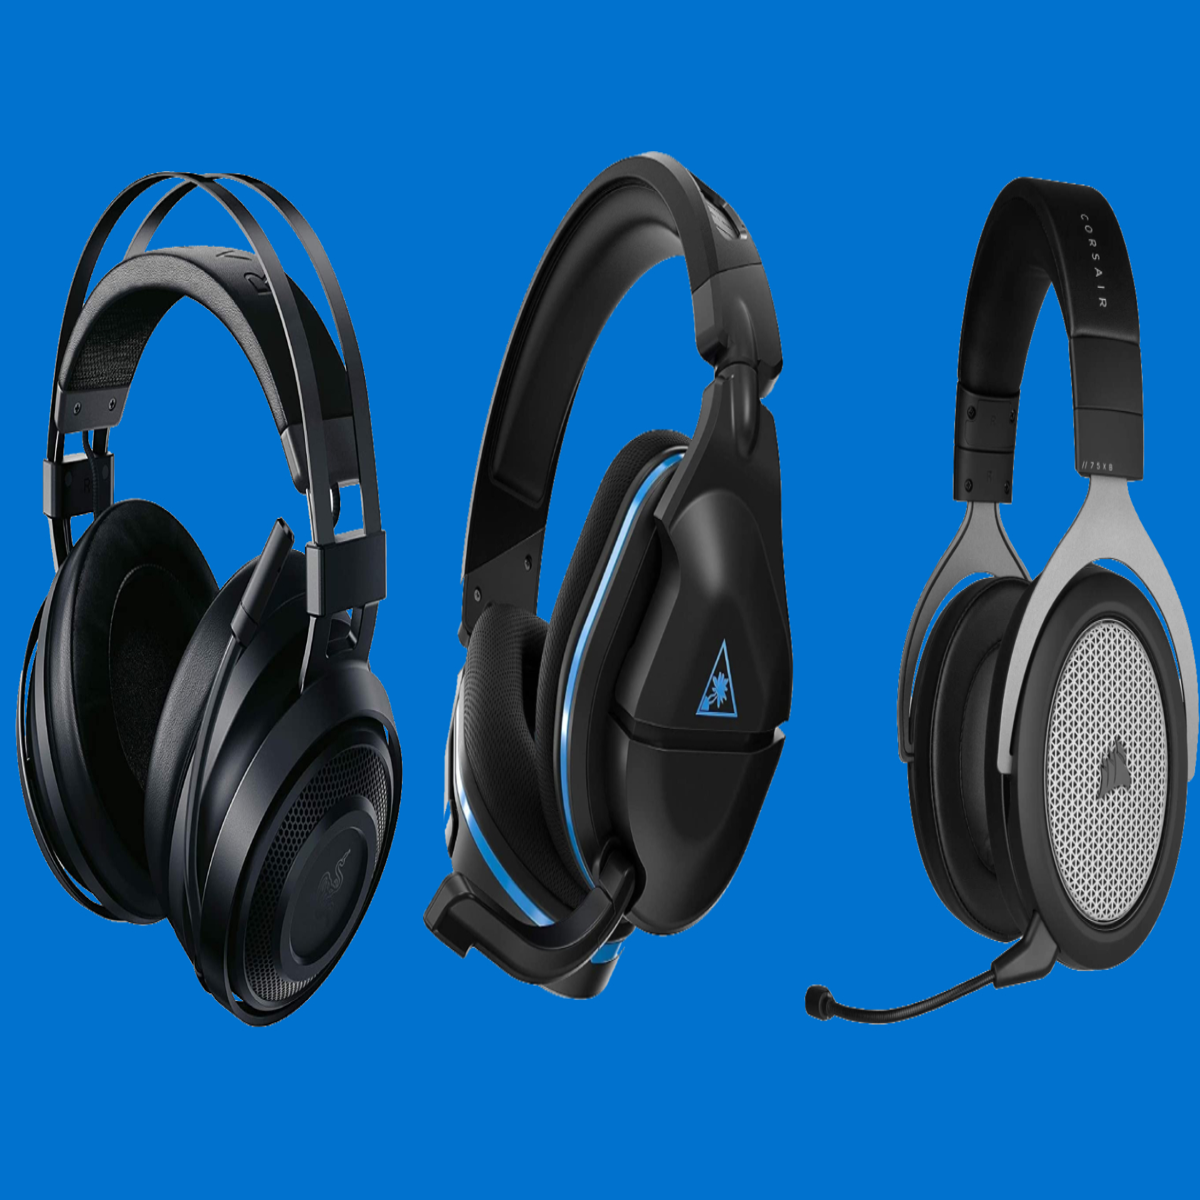 https://assetsio.reedpopcdn.com/best-cheap-gaming-headsets-march.jpg?width=1200&height=1200&fit=crop&quality=100&format=png&enable=upscale&auto=webp